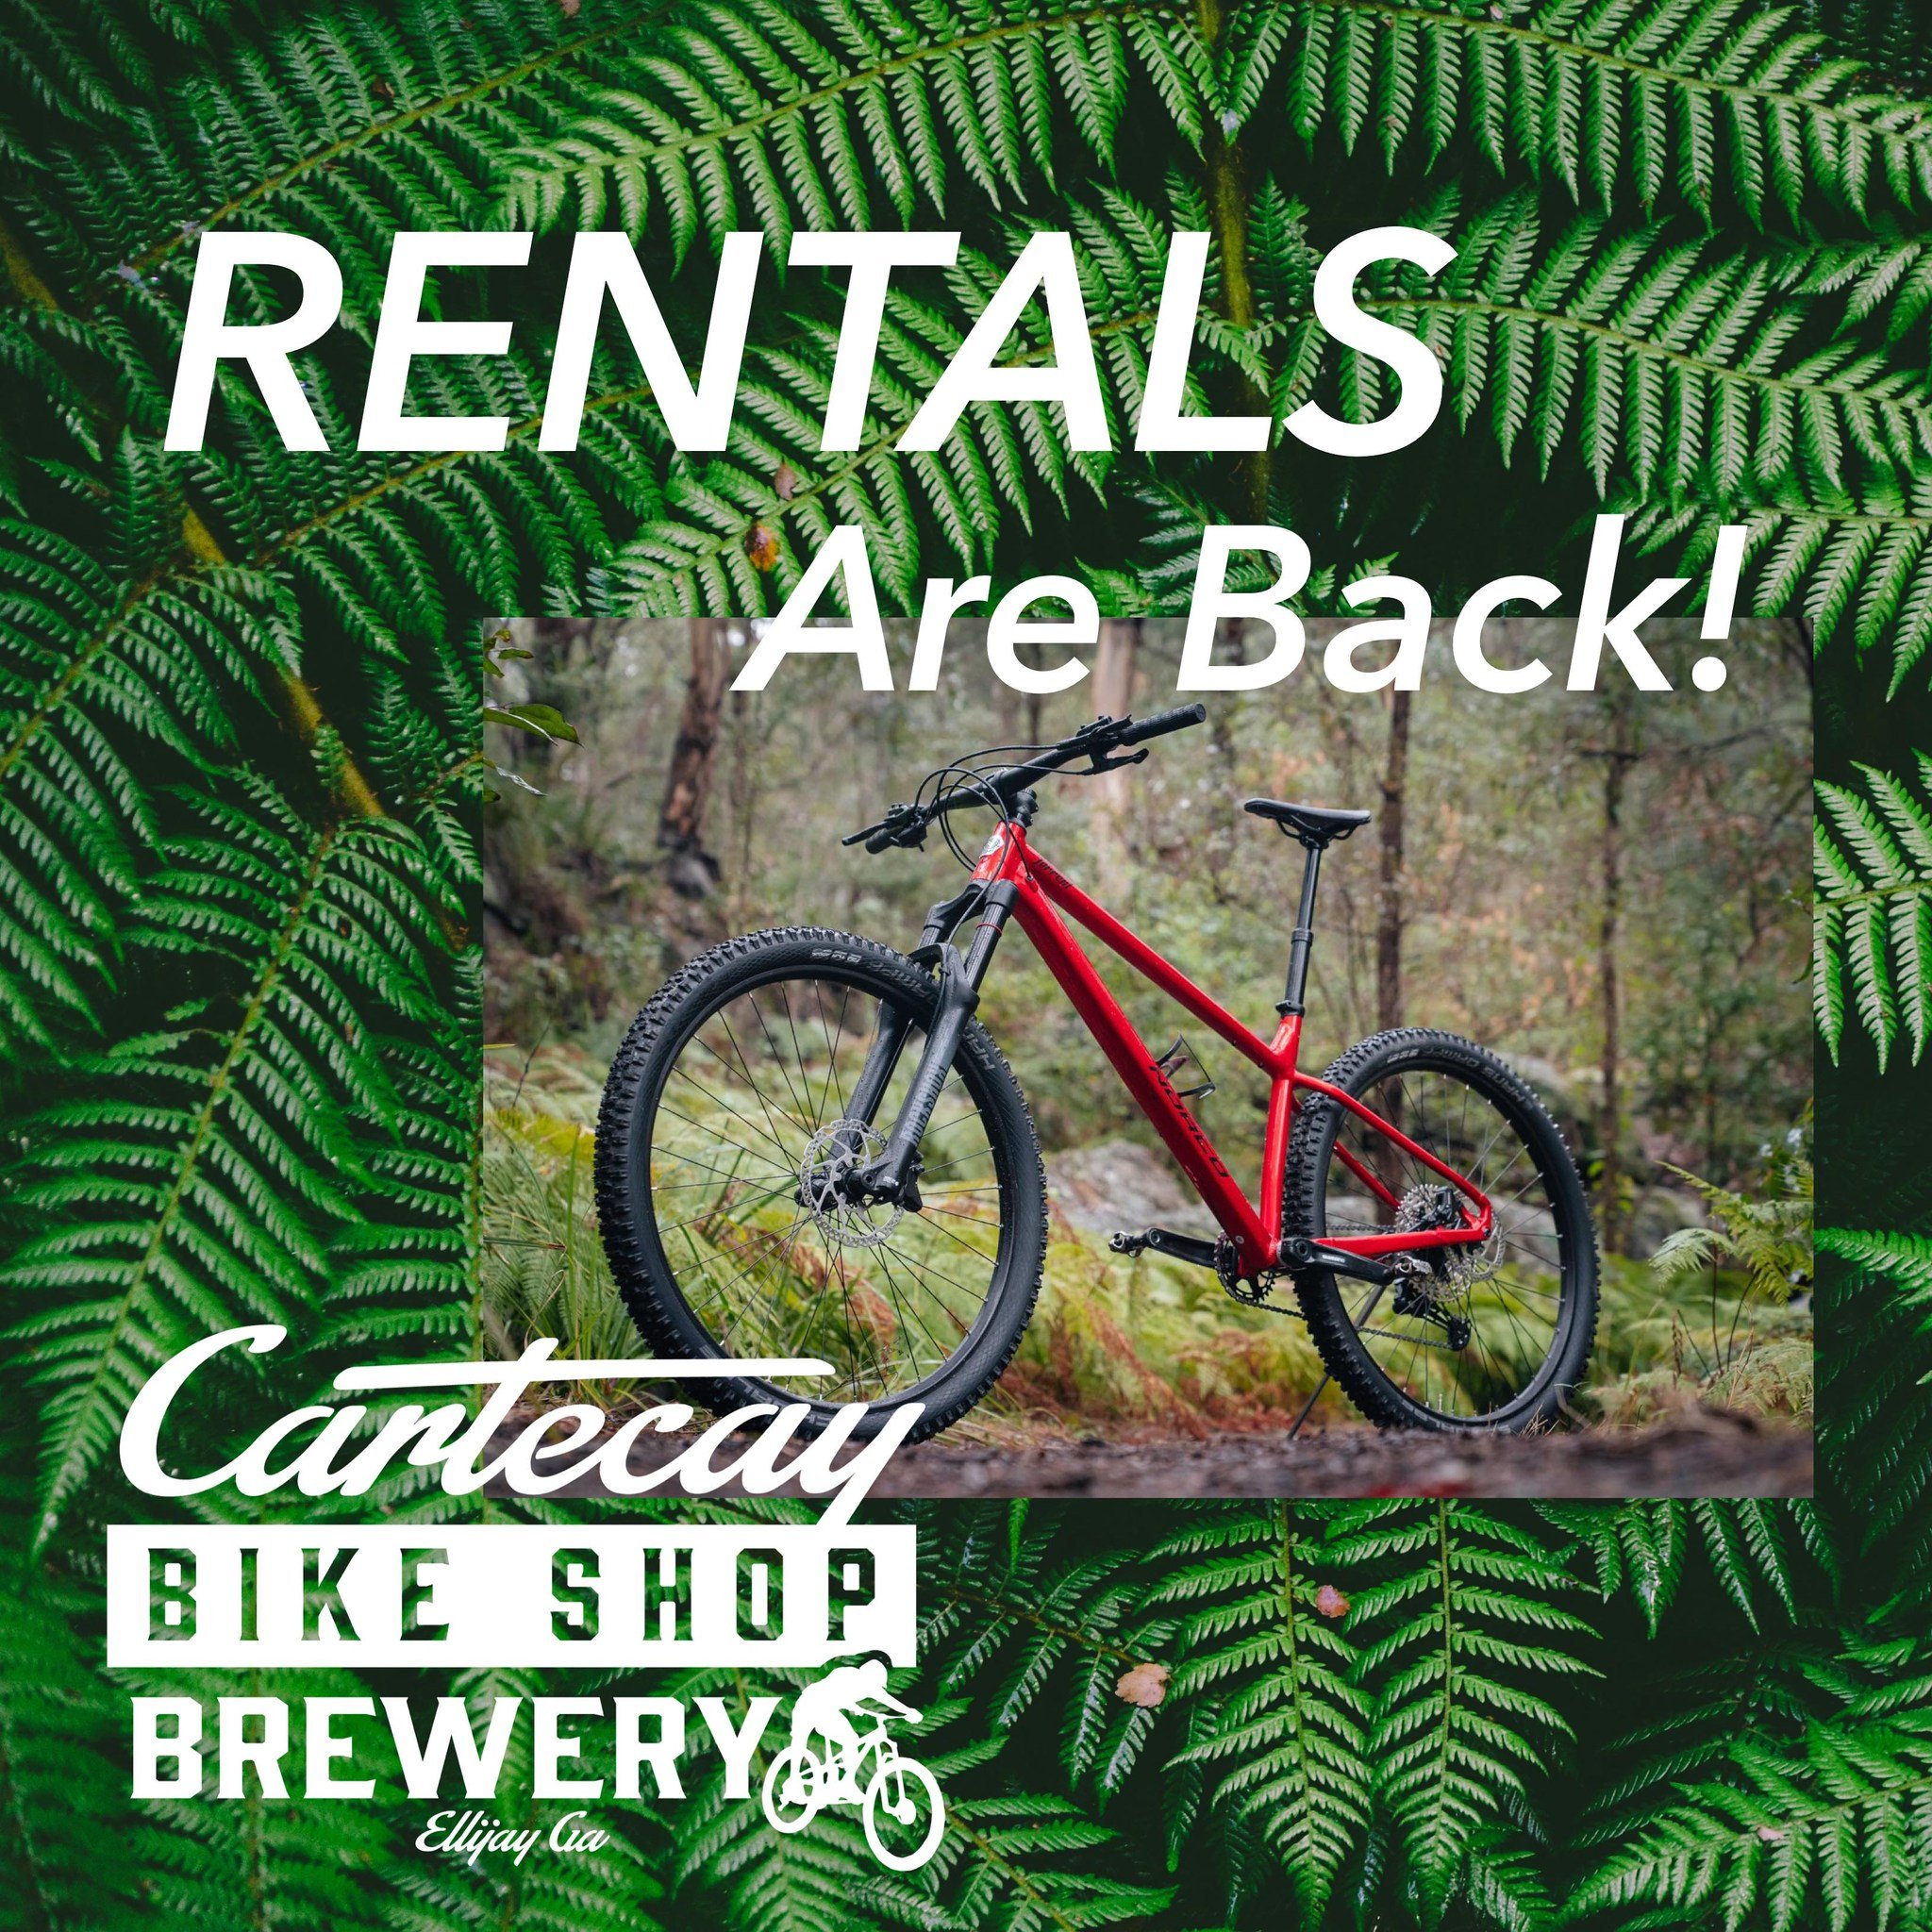 We are happy to announce that rentals are back! We have a limited fleet so please call ahead if you need to reserve one. Hardtails, Full Suspension, E-Full Suspension